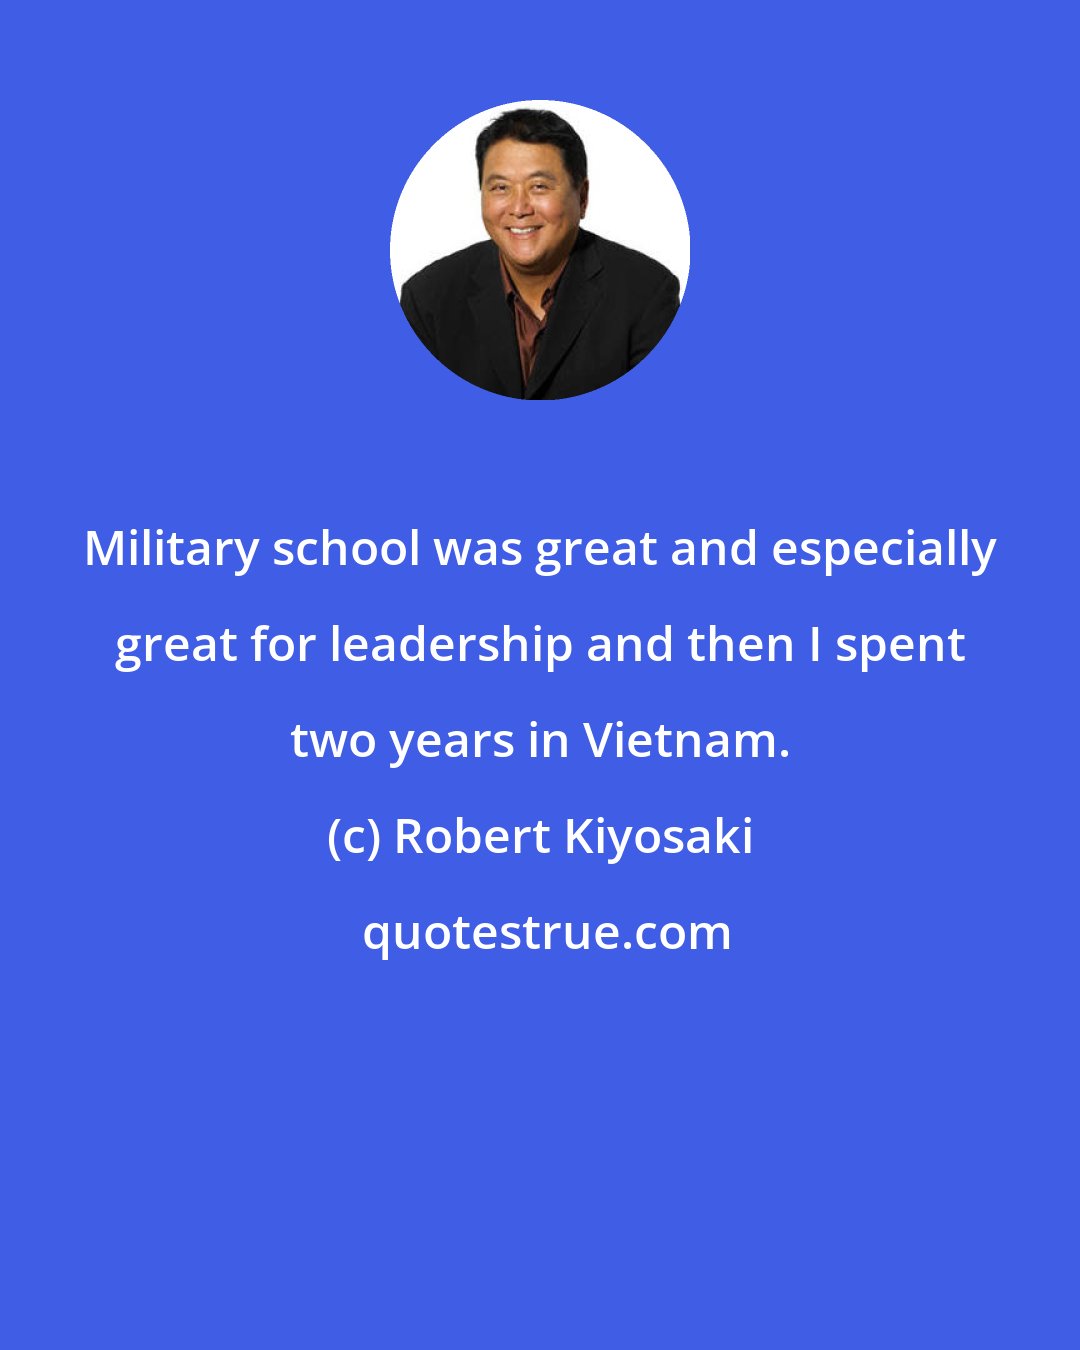 Robert Kiyosaki: Military school was great and especially great for leadership and then I spent two years in Vietnam.